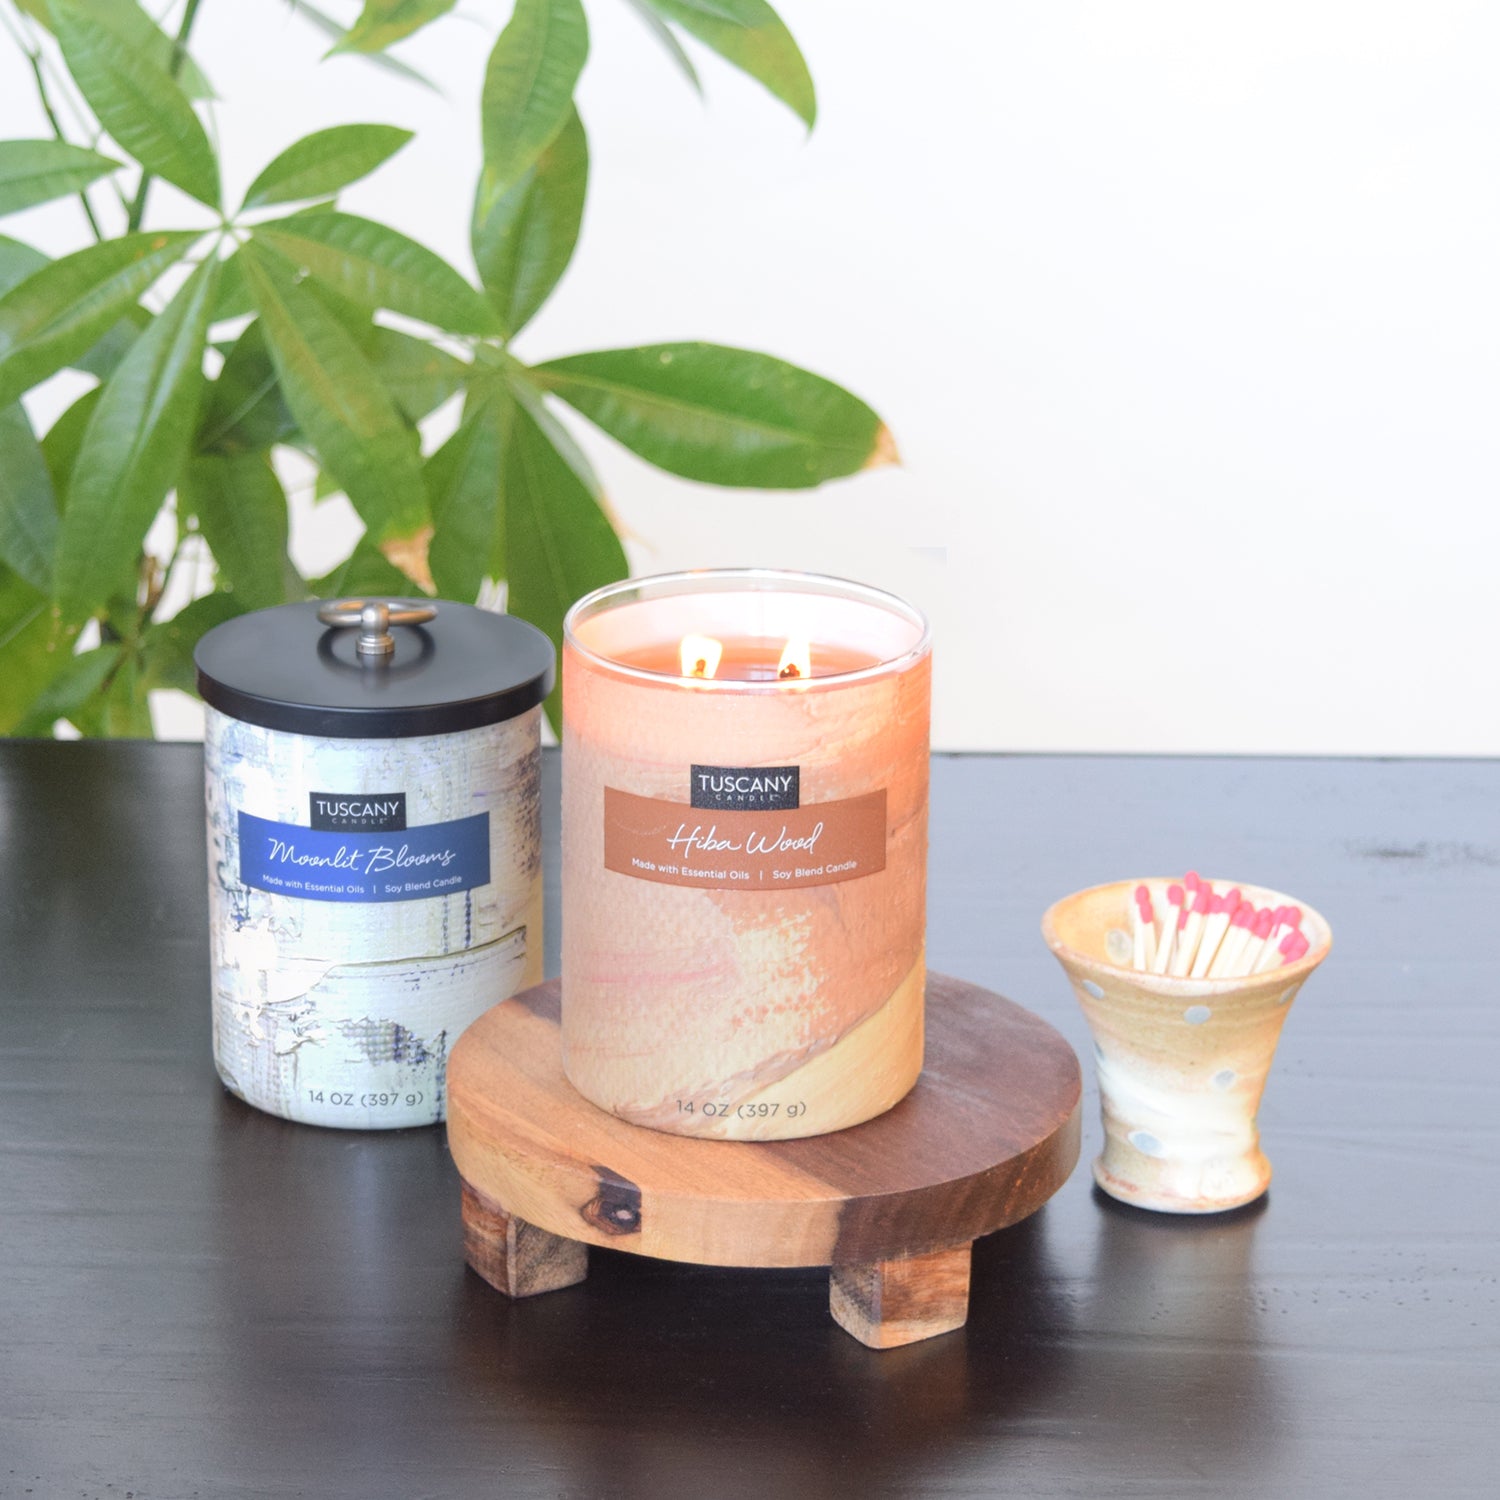 A Moonlit Blooms Scented Jar Candle (14 oz) – Home Décor Collection sits on a wooden table next to a plant.